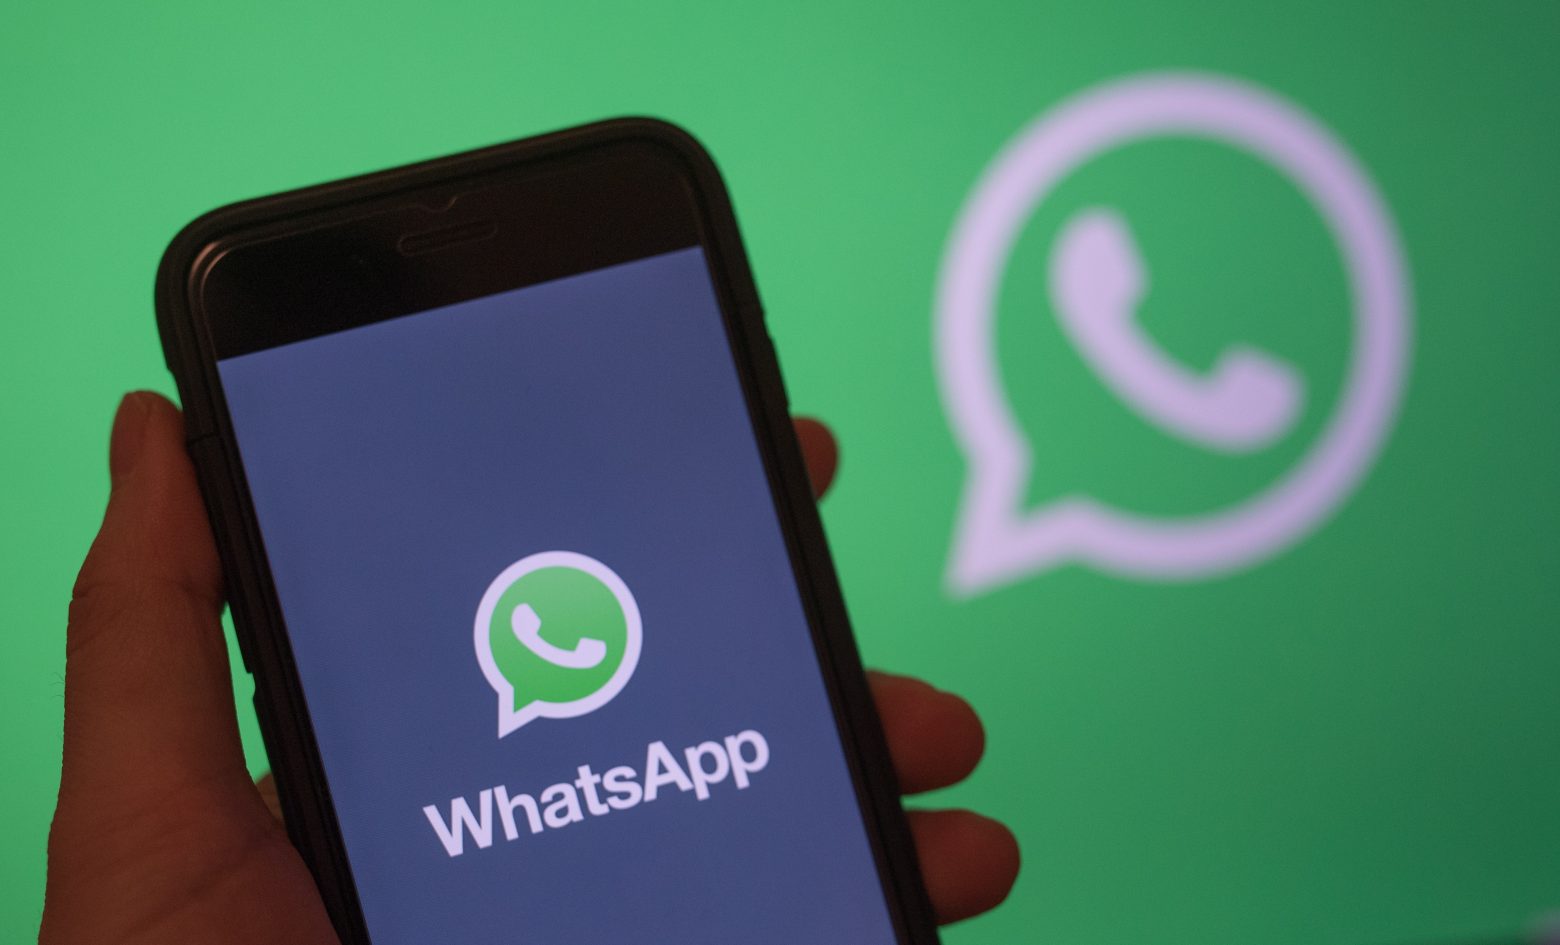 WhatsApp will allow users to share updates on Instagram